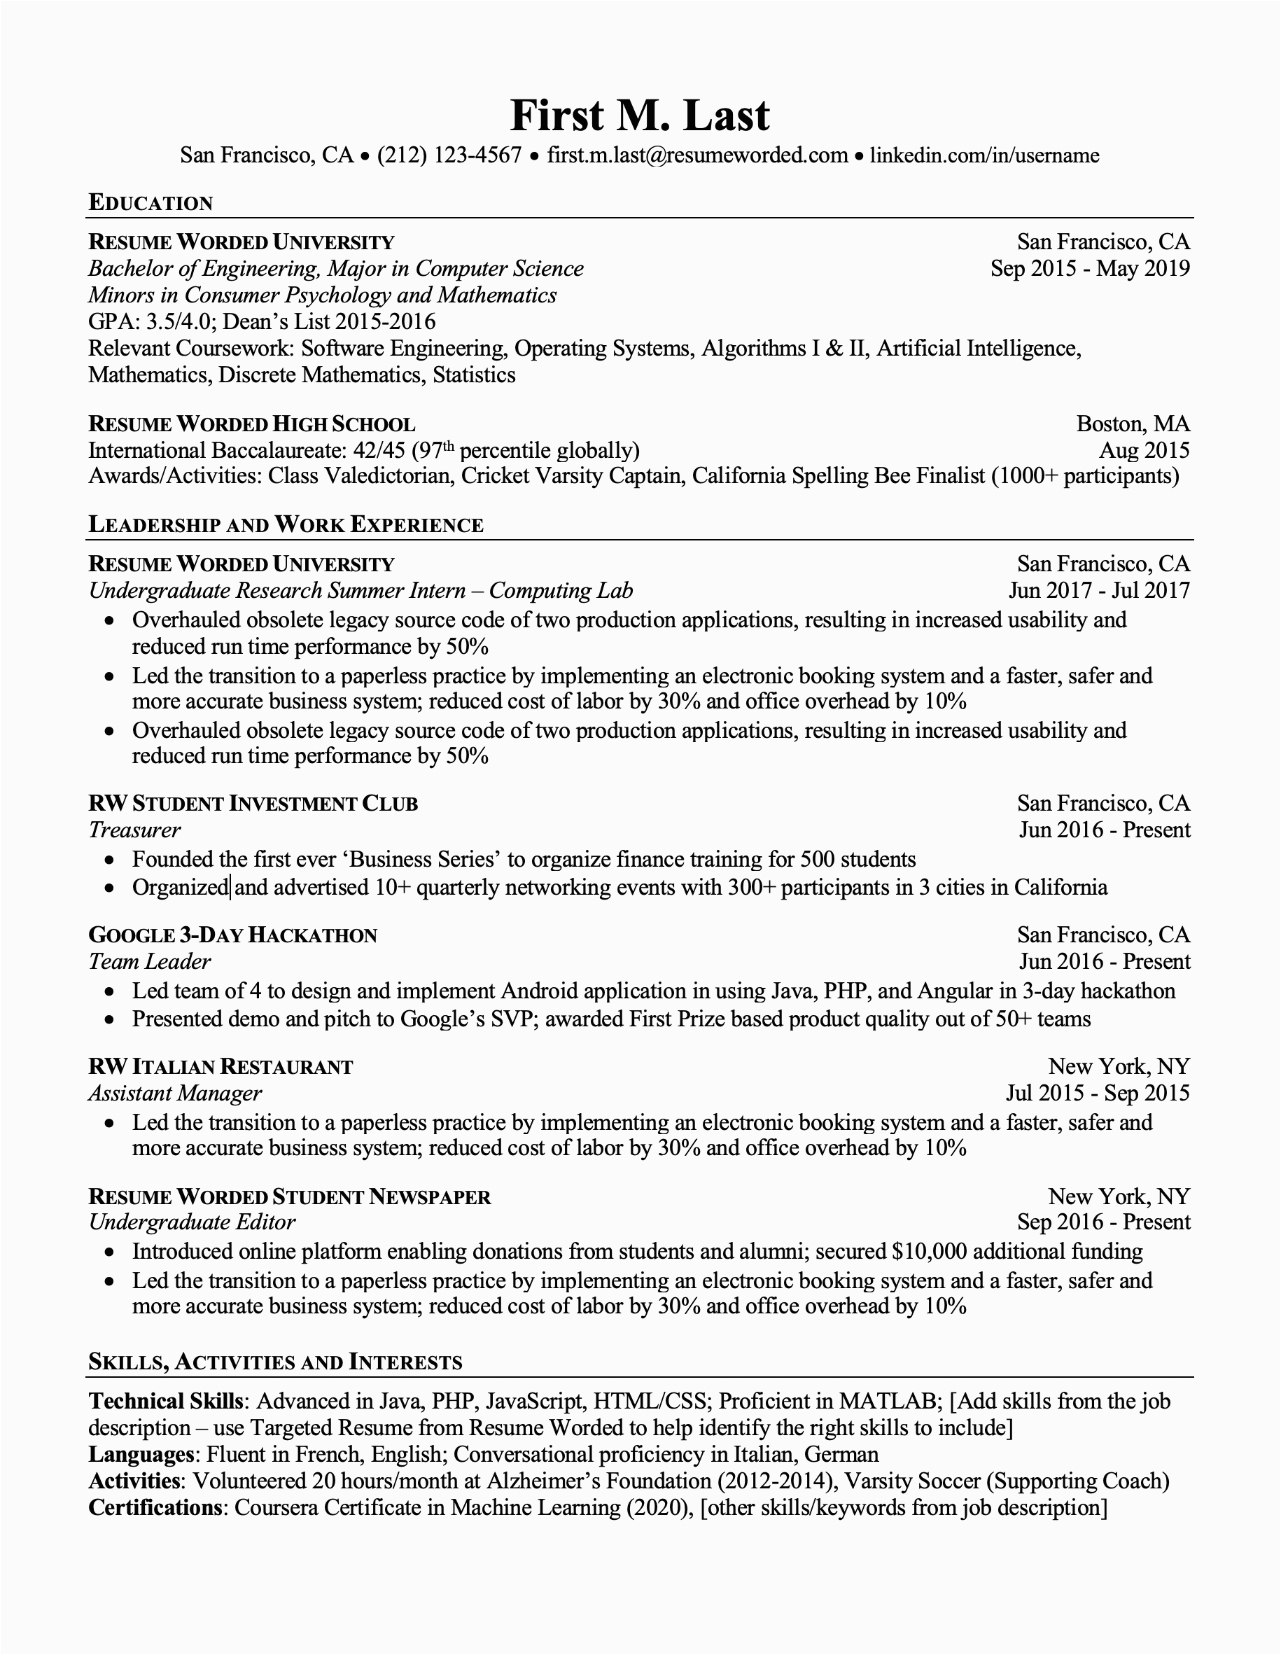 Ats Compliant Resume Template Free Download Professional ats Resume Templates for Experienced Hires